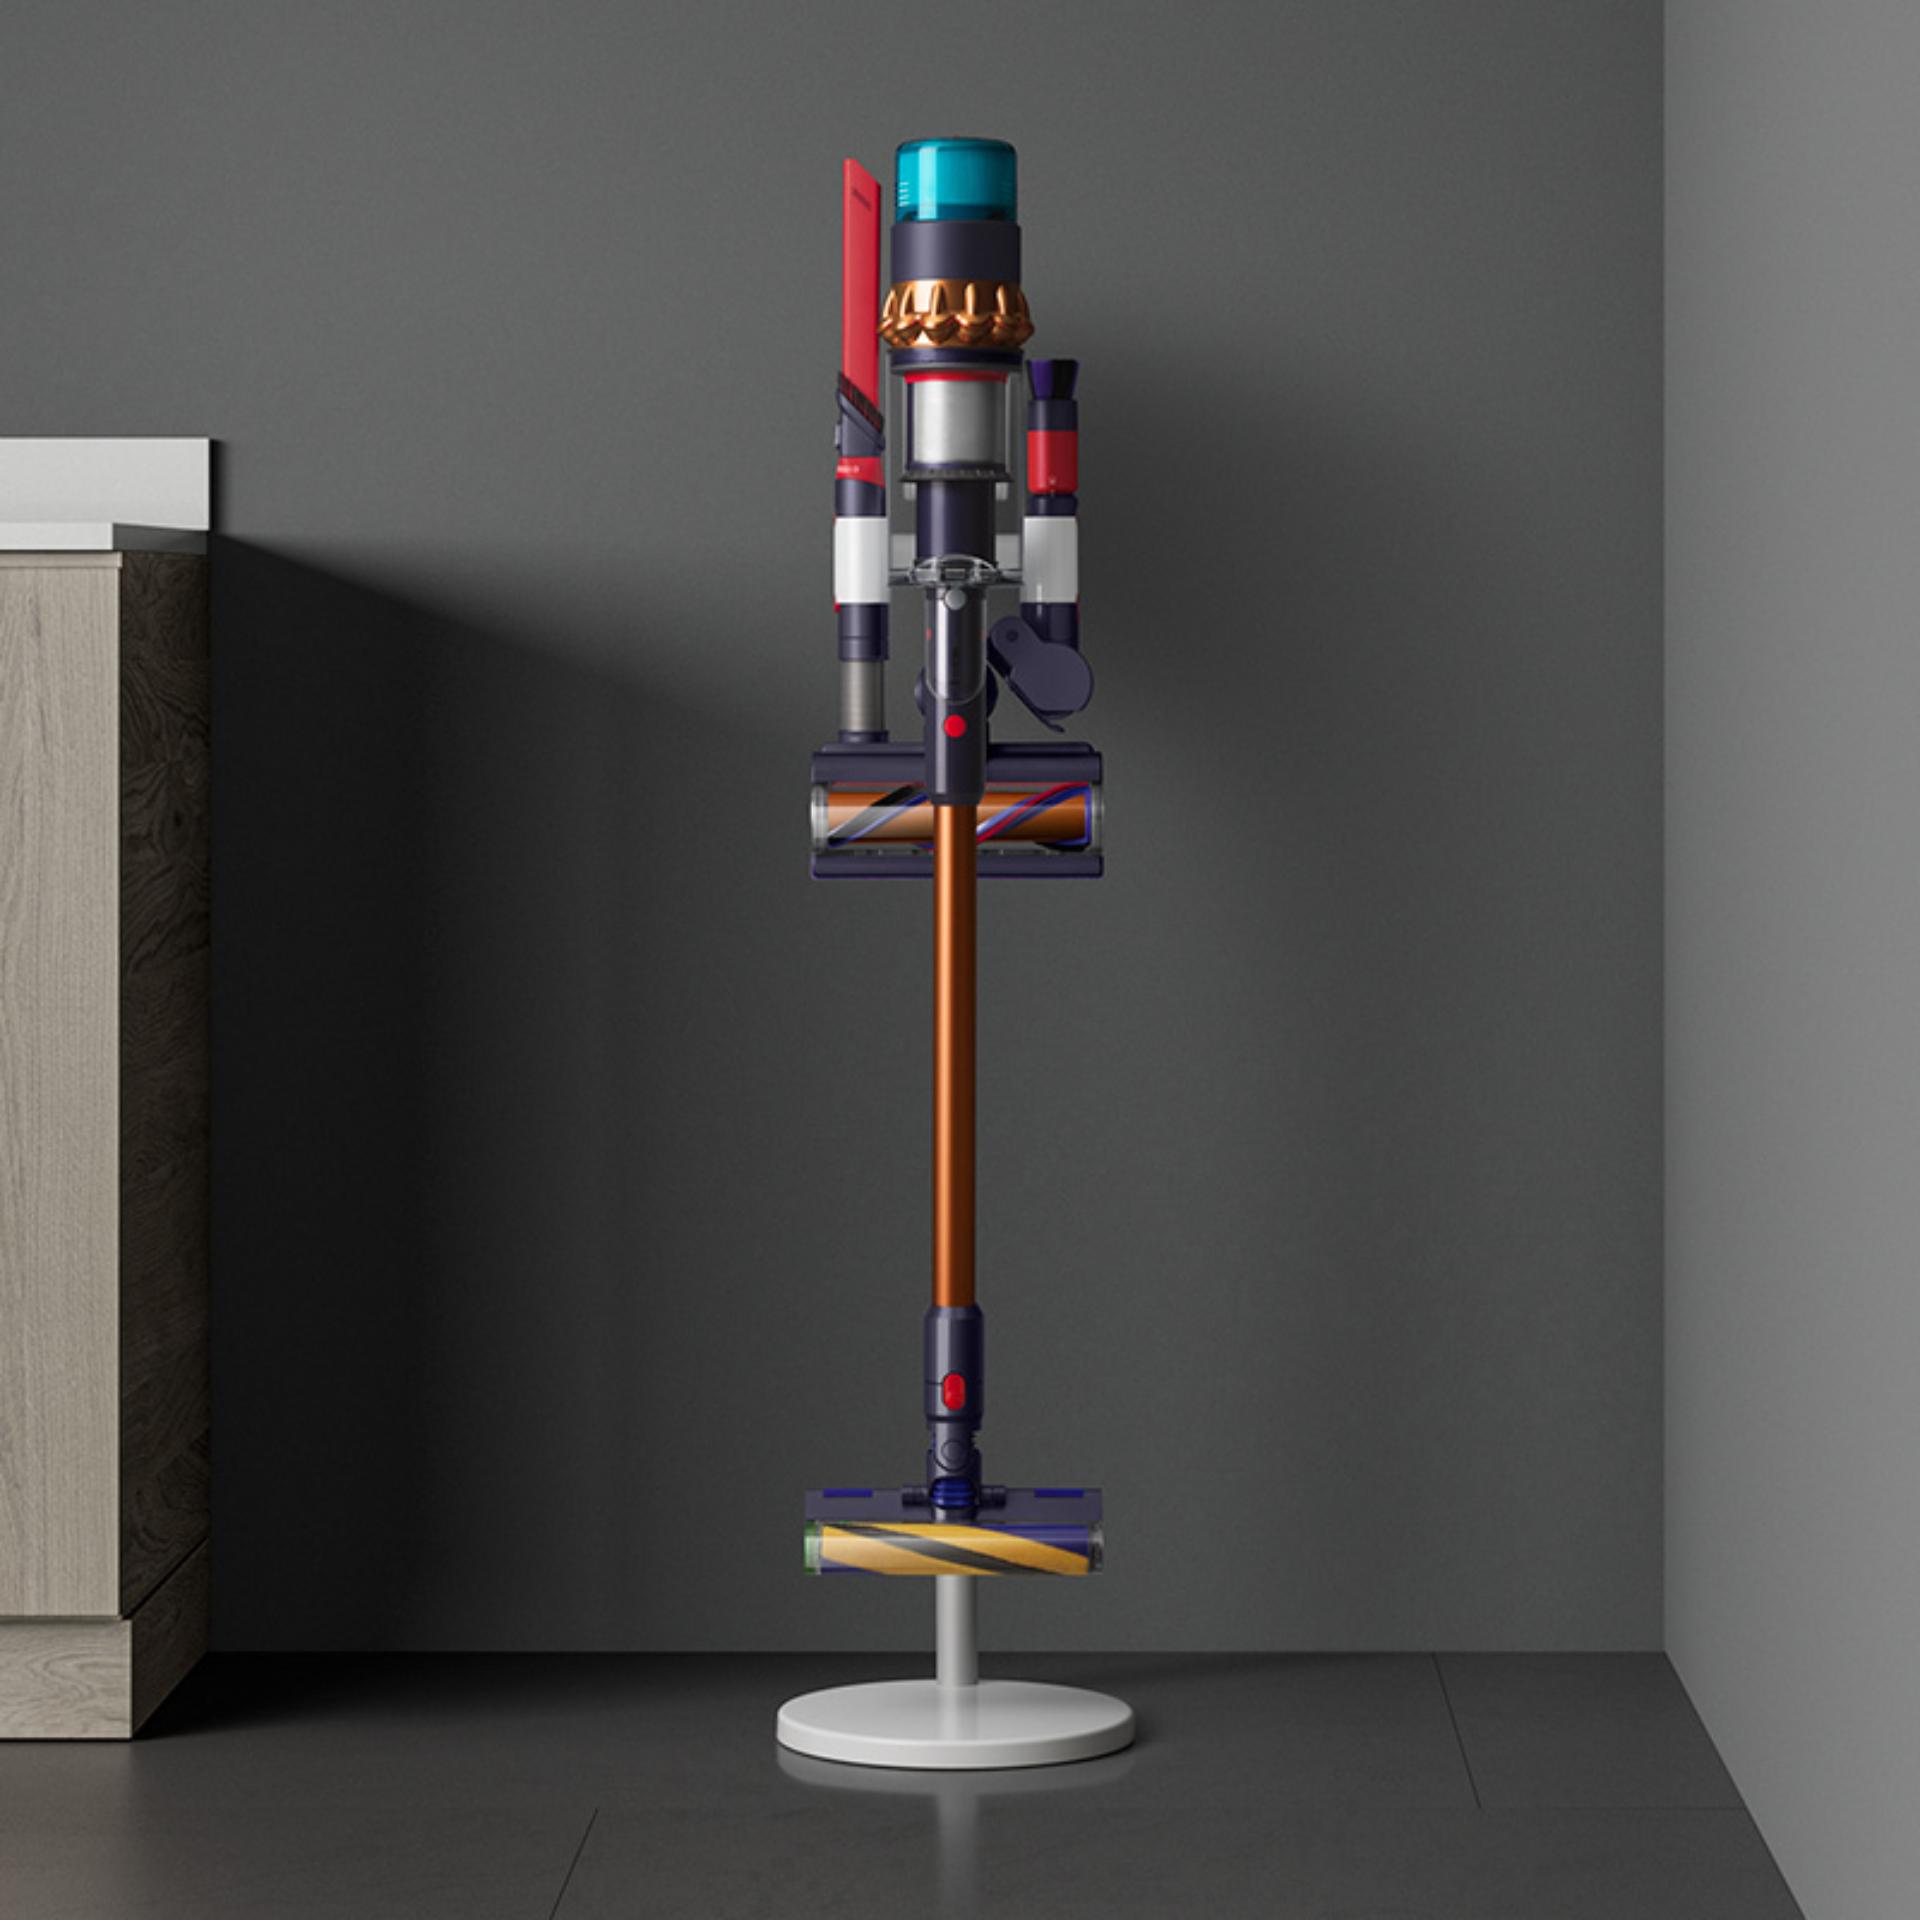 Upright Gen5 with signature Dyson laser with blue gift boxes in the background